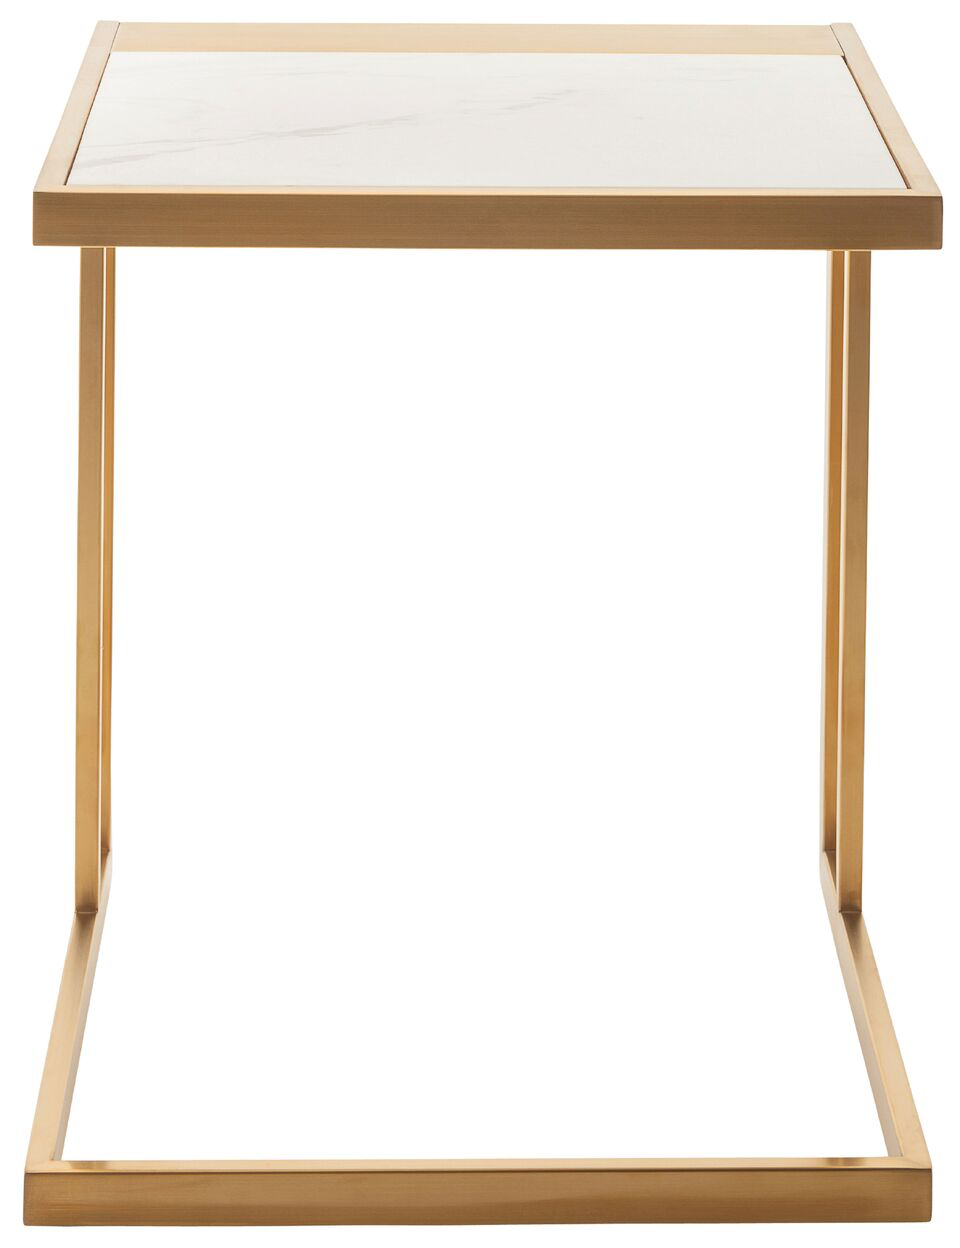 Load image into Gallery viewer, Ethan Side Table Side Table Nuevo     Four Hands, Burke Decor, Mid Century Modern Furniture, Old Bones Furniture Company, Old Bones Co, Modern Mid Century, Designer Furniture, https://www.oldbonesco.com/
